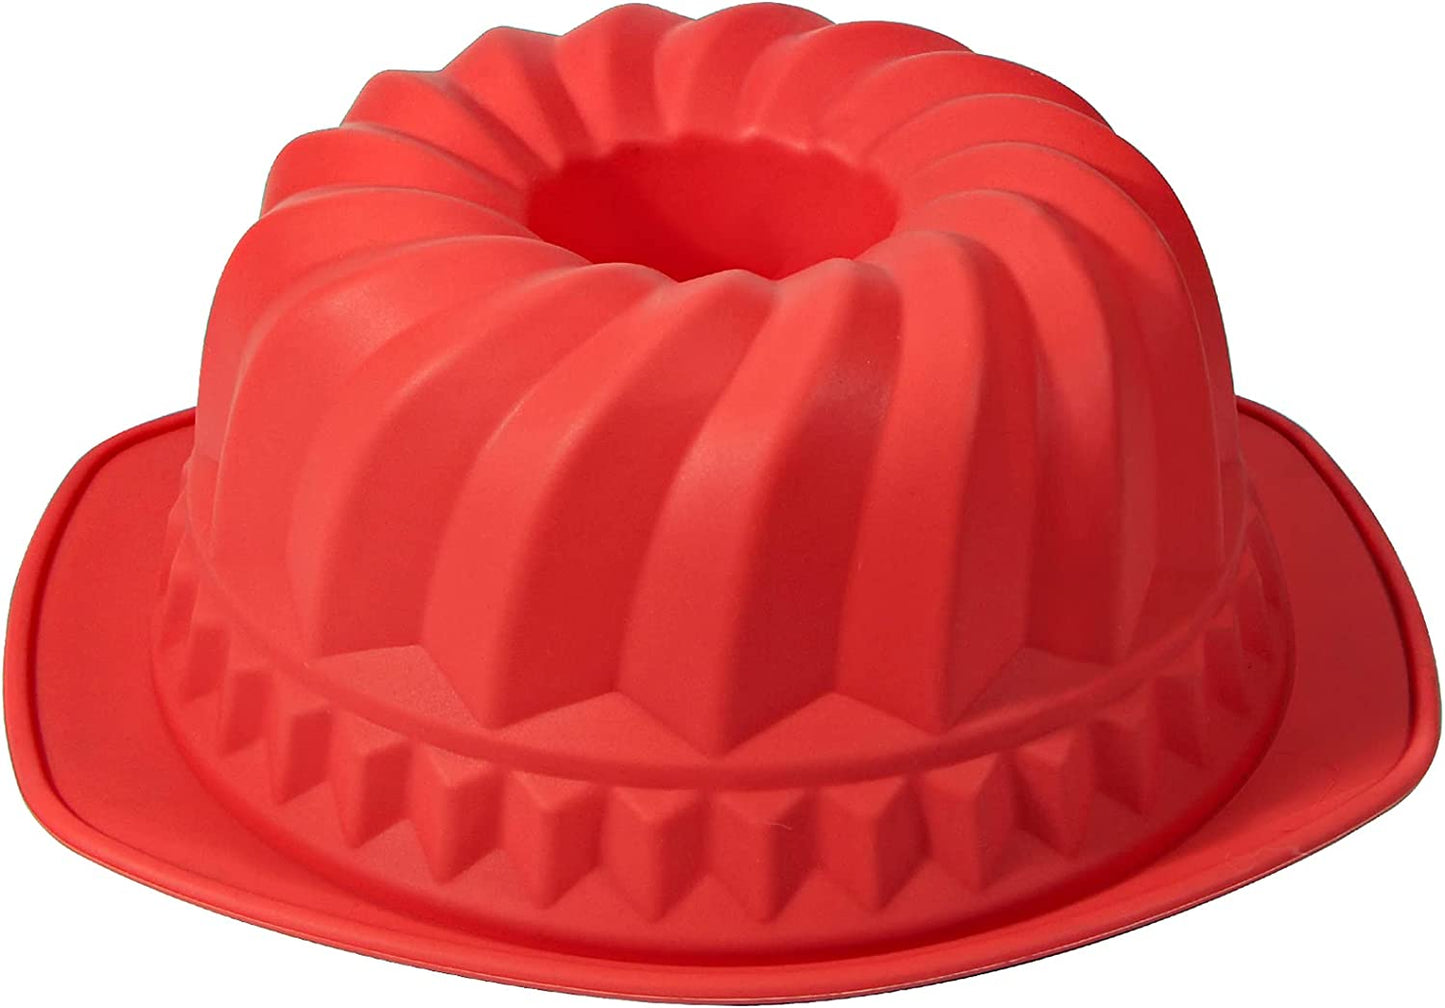 Doolland 9.5 in Silicone Cake Pan, Non-Stick Bundt Pan with Sturdy Handle, Cake Baking Molds for Bundt Cakes, Perfect Bakeware for Cake, Jello